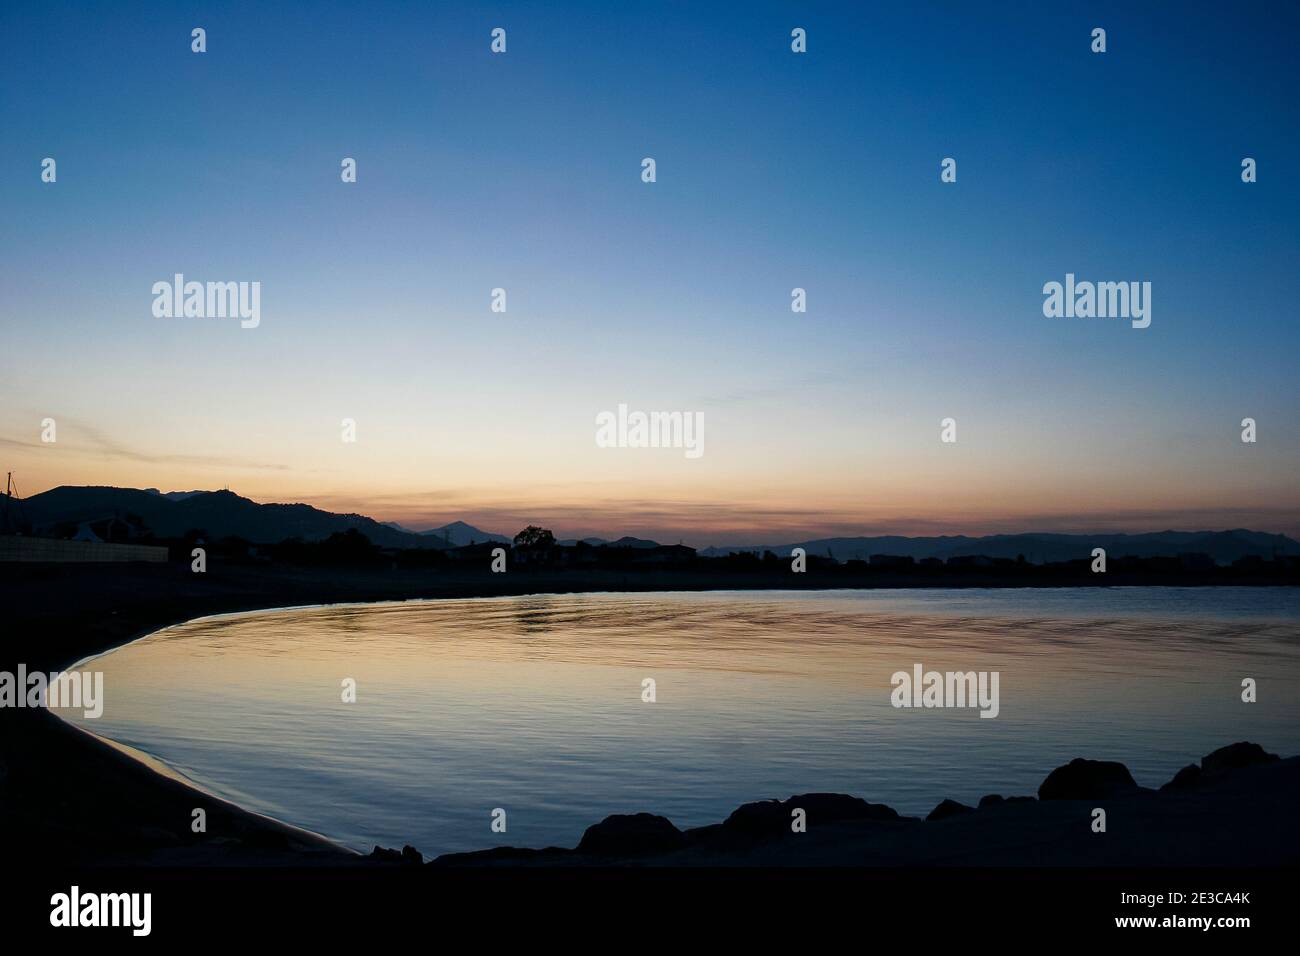 The sun setting over the mountains with views over a calm still bay in Oliva, Spain Stock Photo